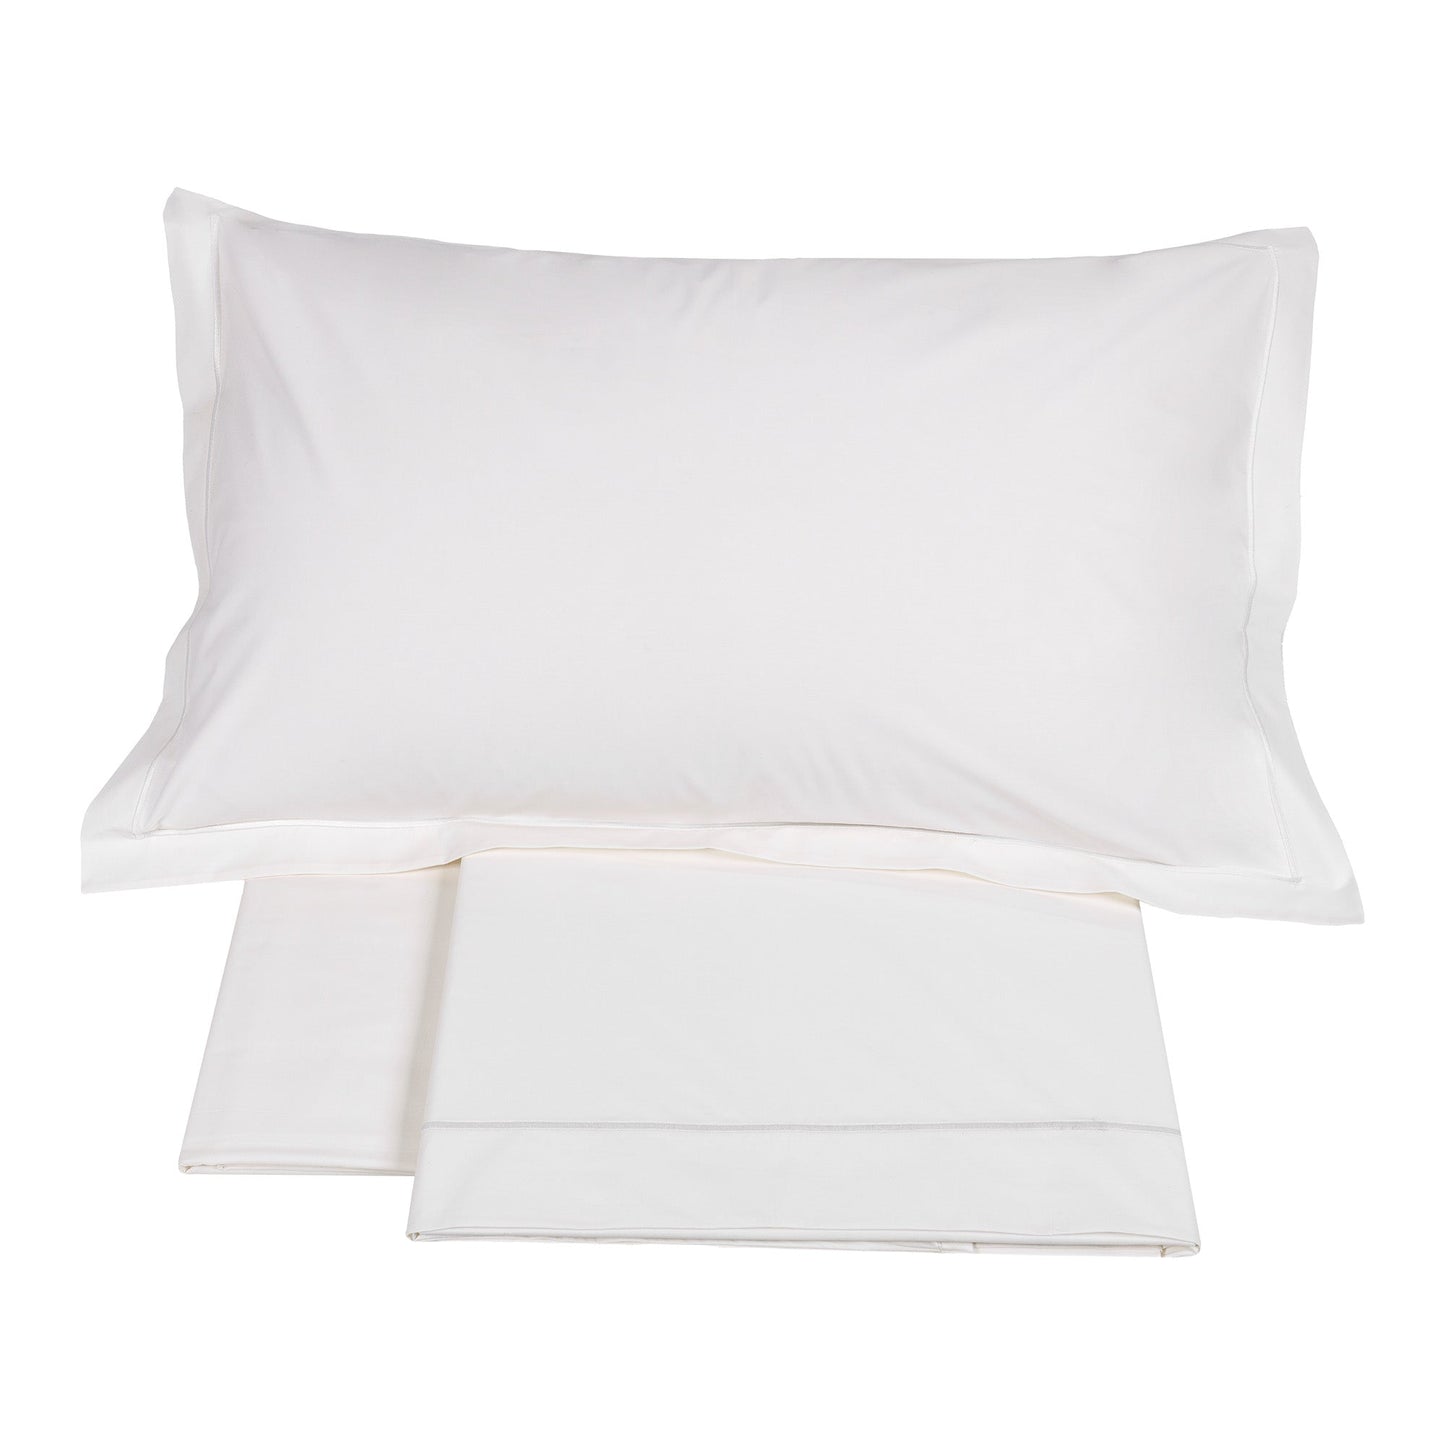 250TC Percale Cotton Sheet Set with Embroidered Cord - Tortona